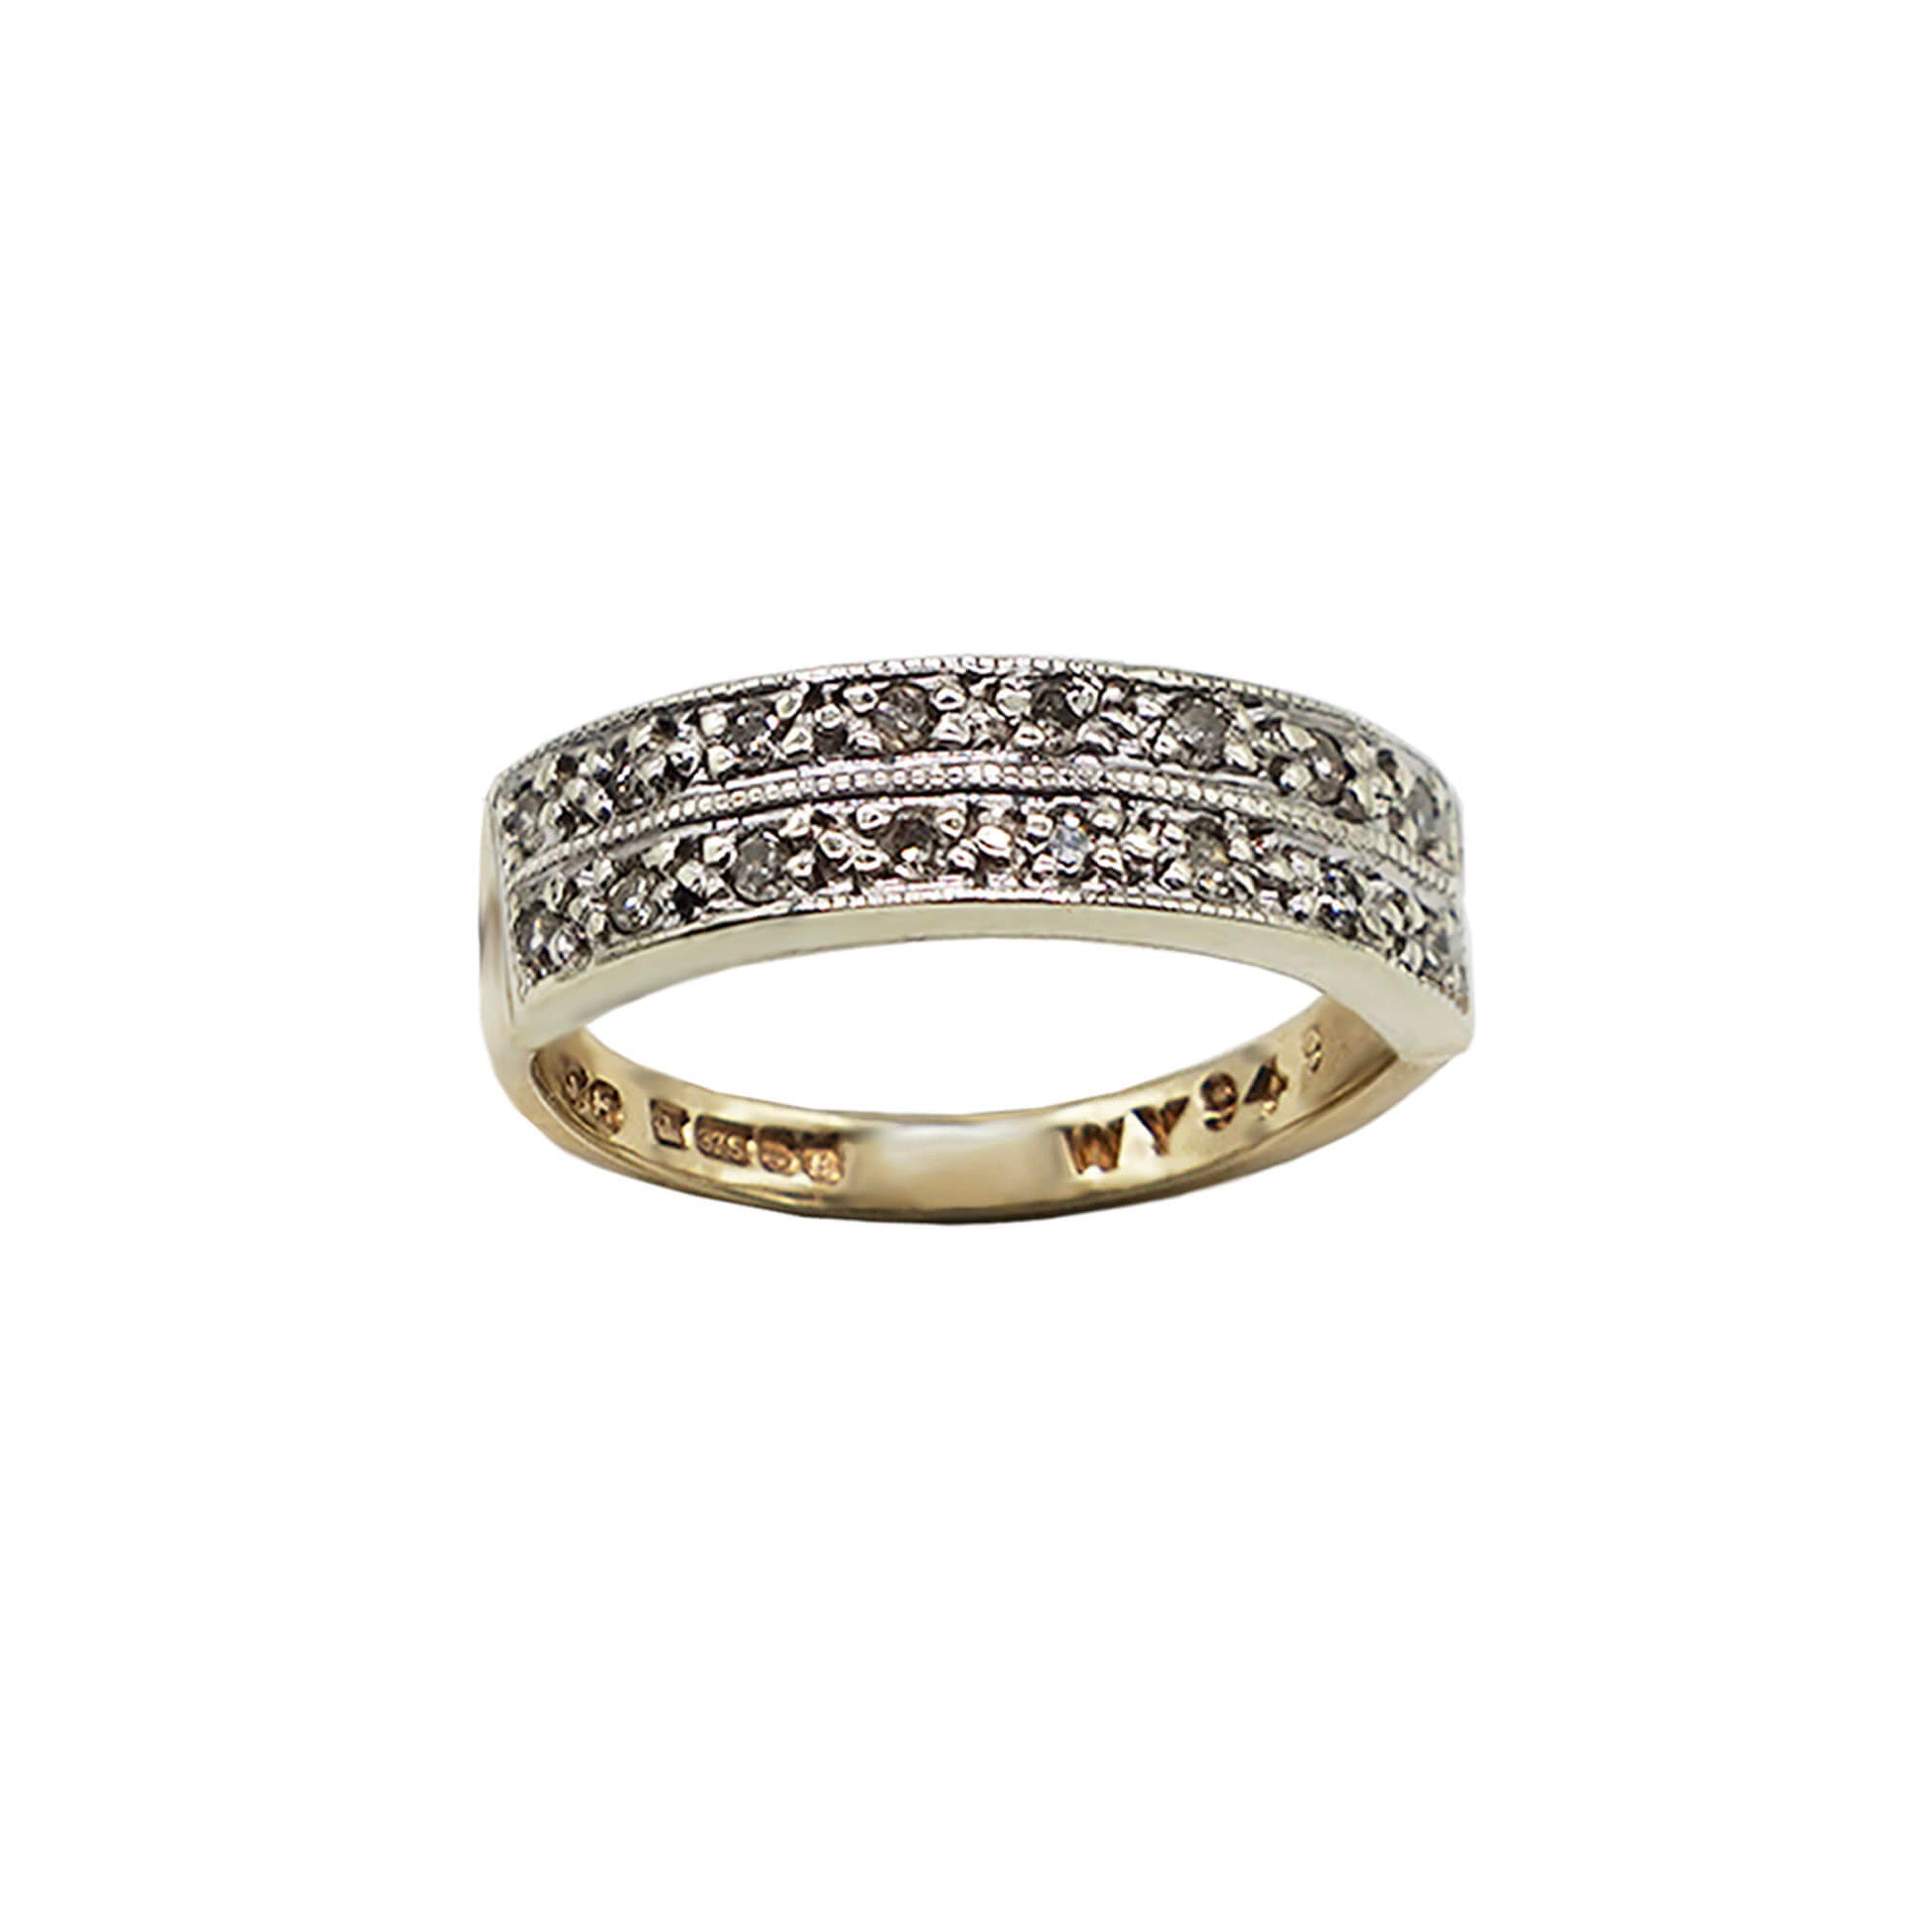 Double row diamond illusion set ring in white gold with hallmarks on inner band.